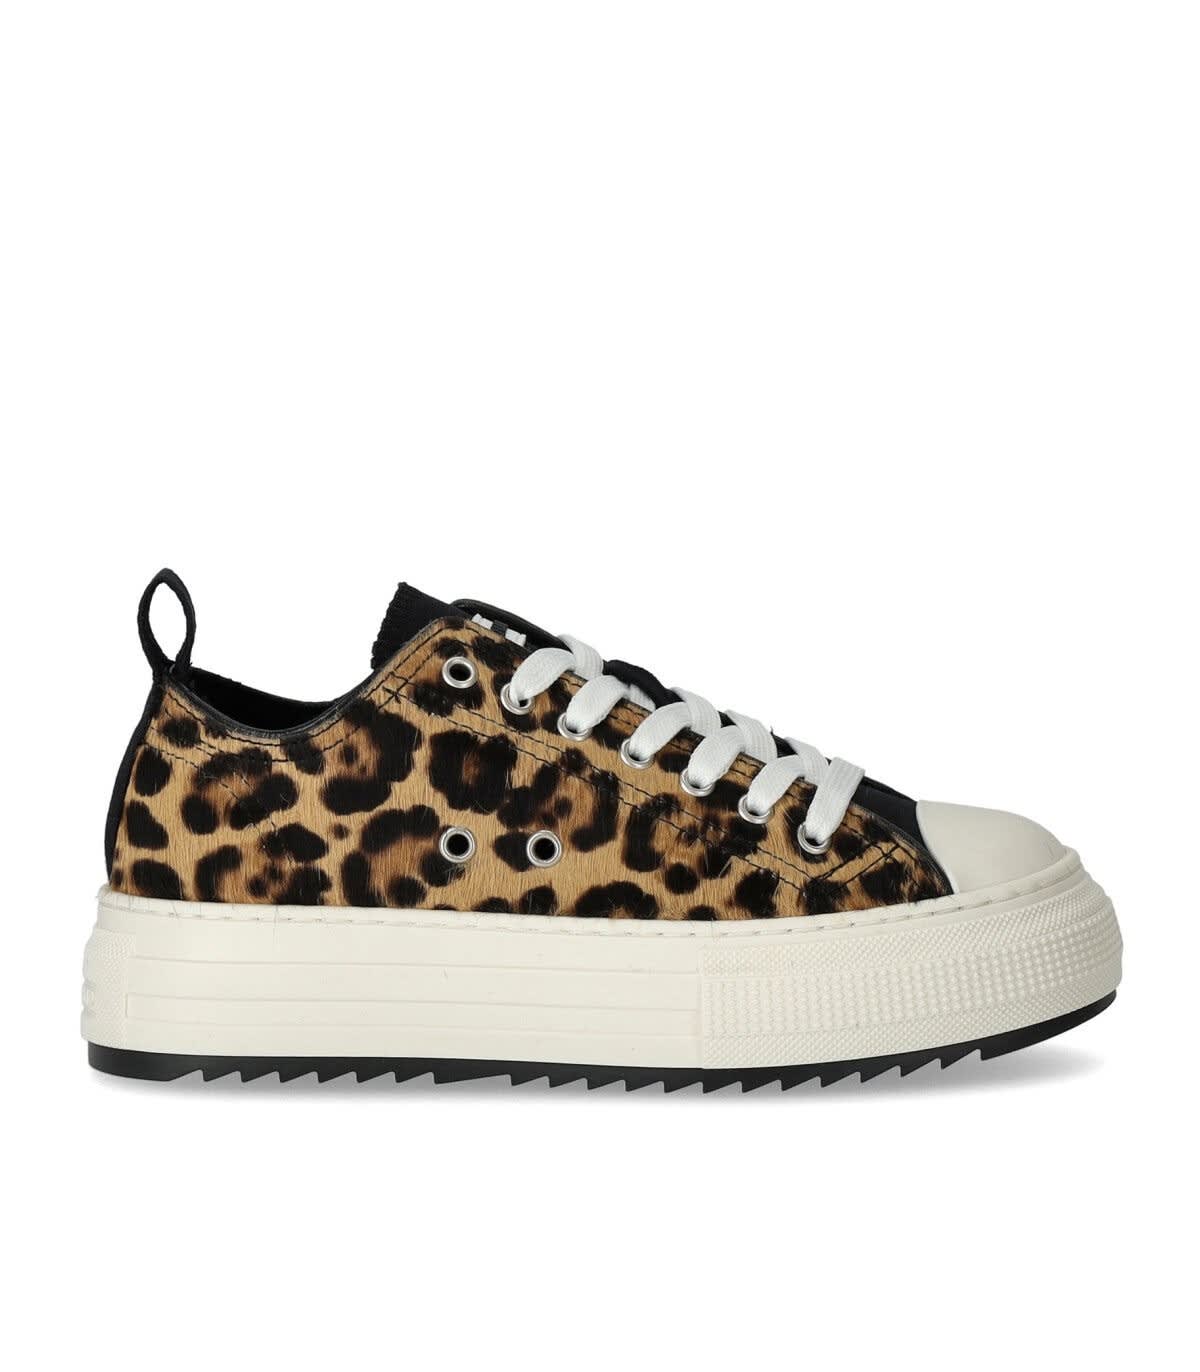 DSQUARED2 BERLIN LEOPARD PRINED LACE-UP trainers